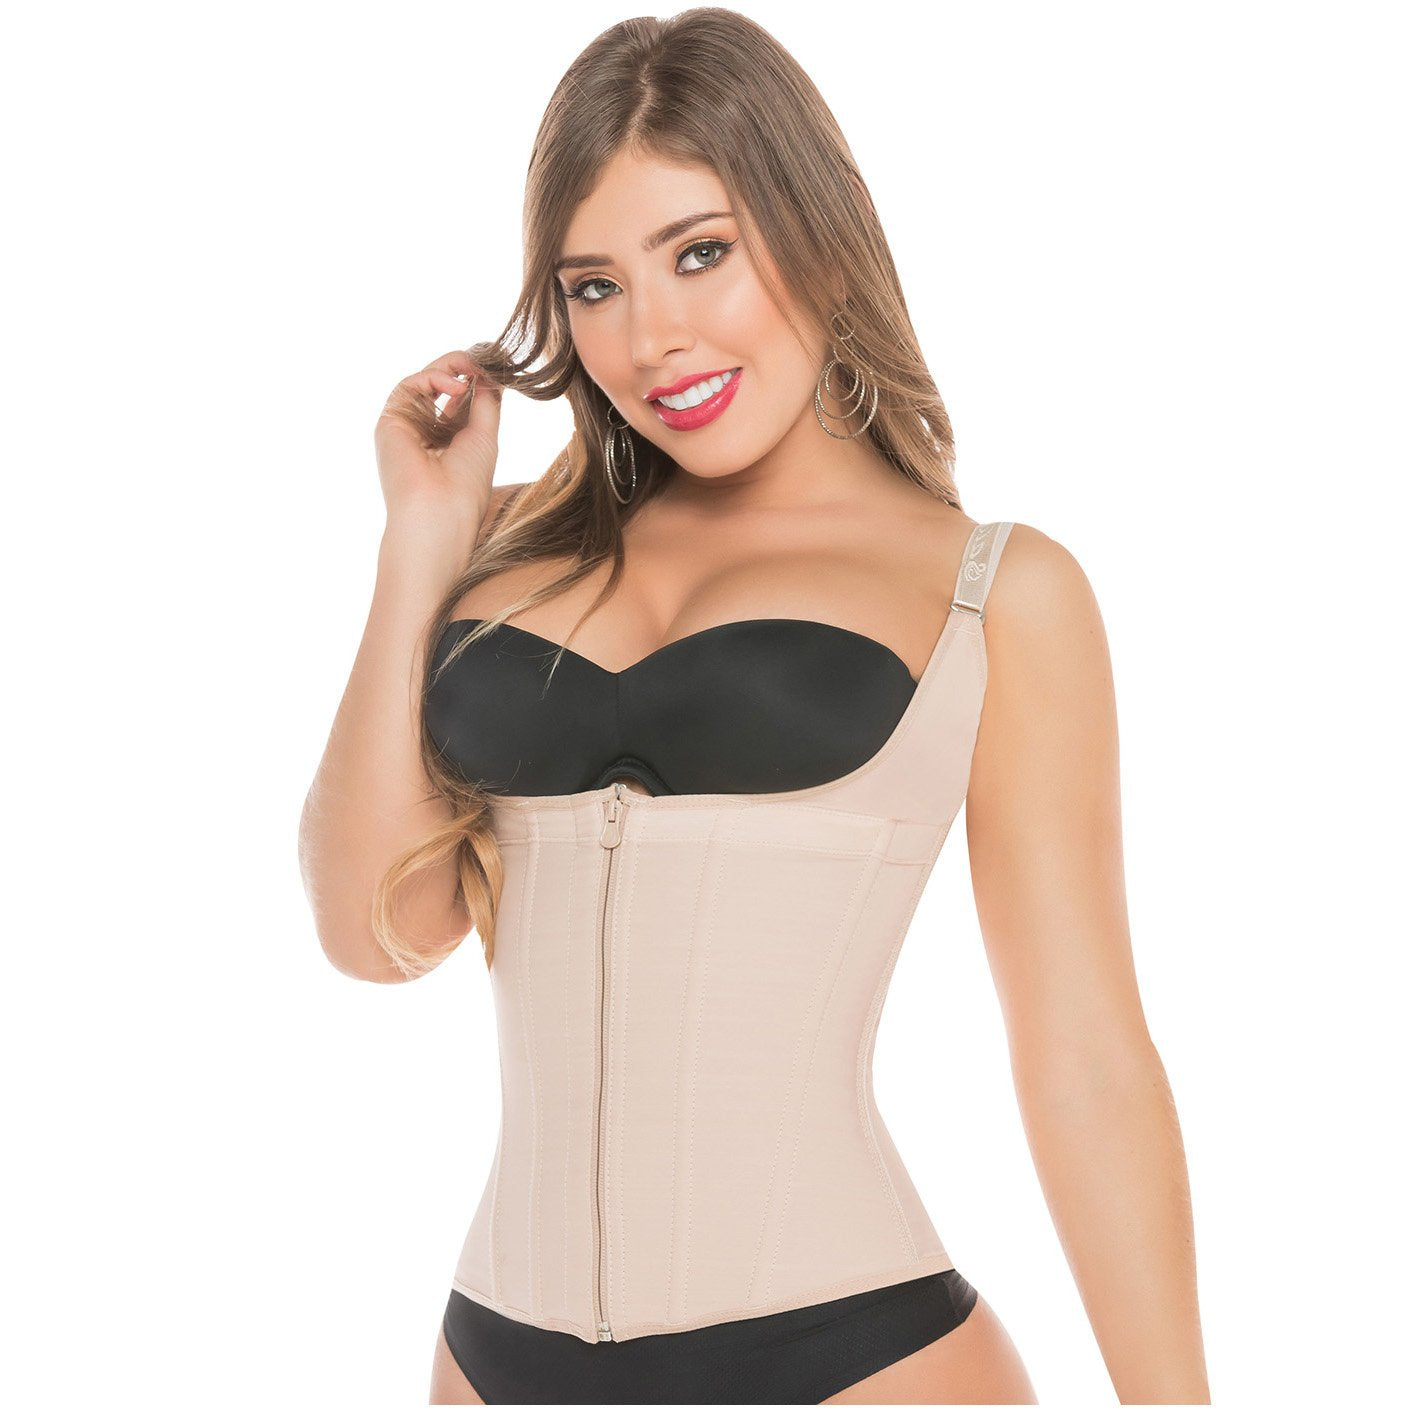 Faja Salome 0313  You will feel amazing with the compression this